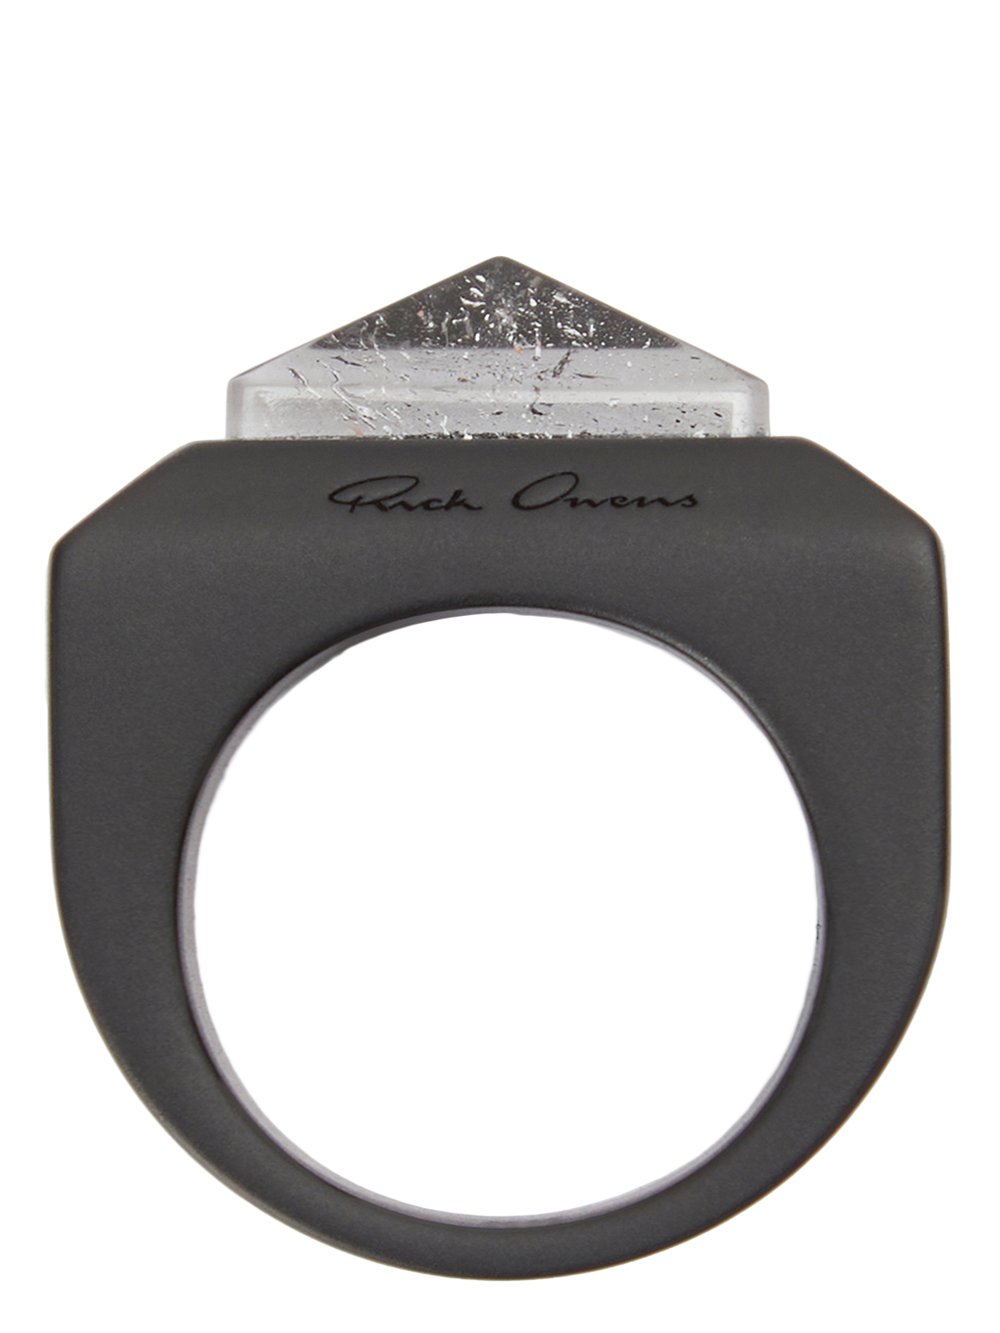 RICK OWENS CRYSTAL PYRAMID RING IN BLACK BRASS AND ROCK CRYSTAL